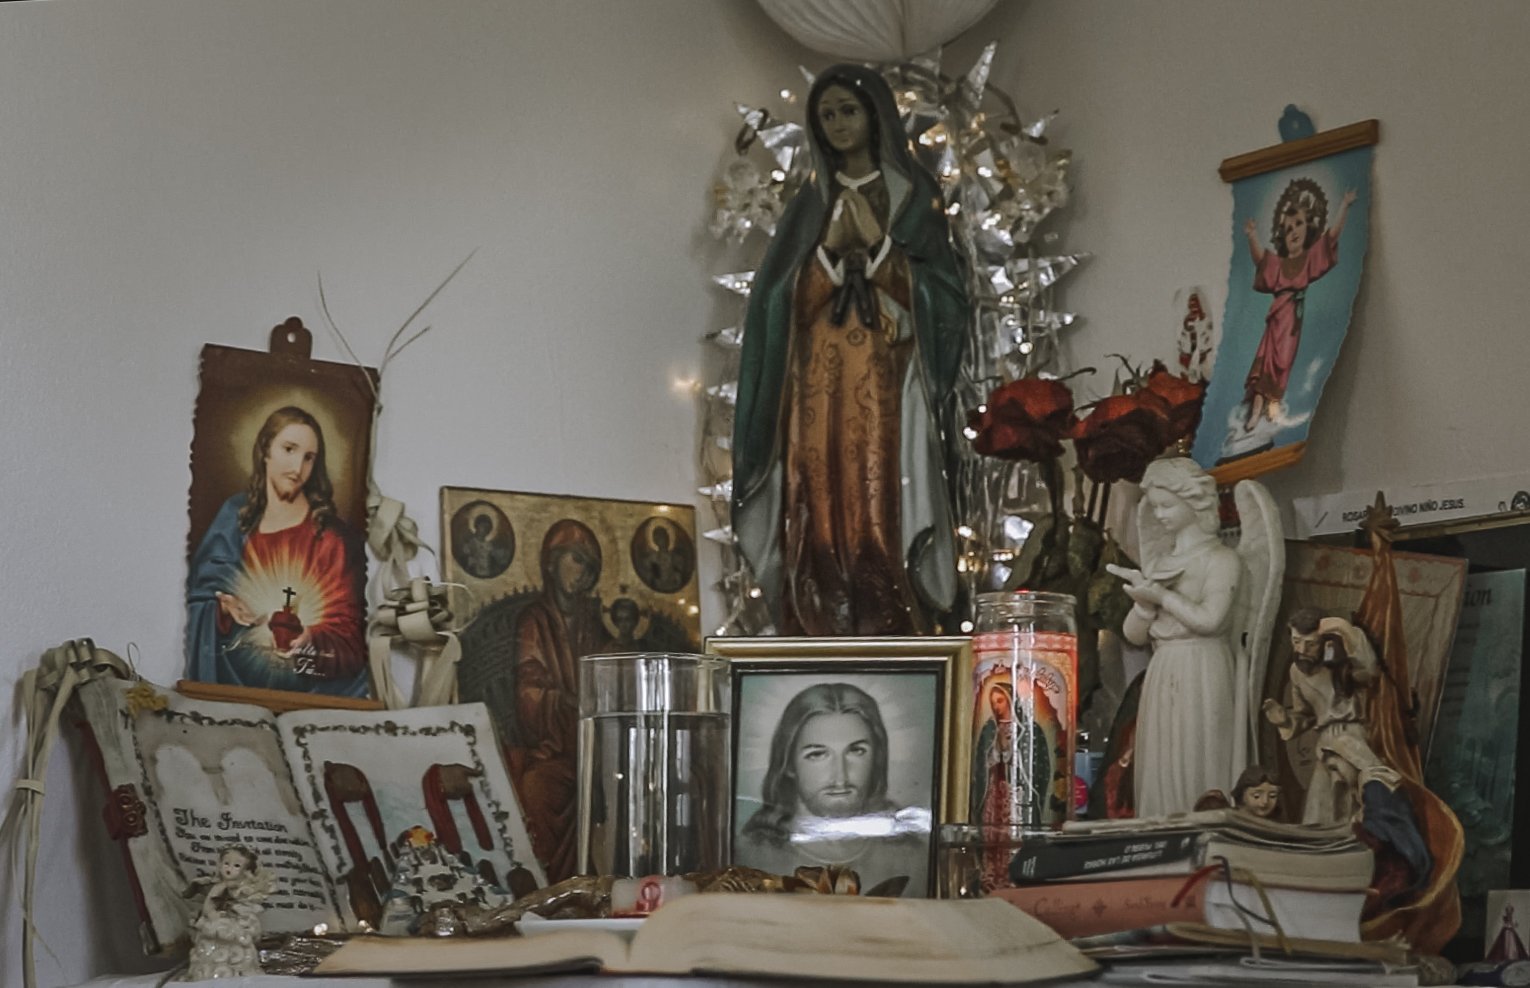  The dozen crab pickers sharing a ranch home on this secluded Chesapeake Bay archipelago have decorated the bedroom walls with a Mexican flag, a crucifix, pictures of smiling kids at Christmas — all designed to soften a sense of being totally alone. 